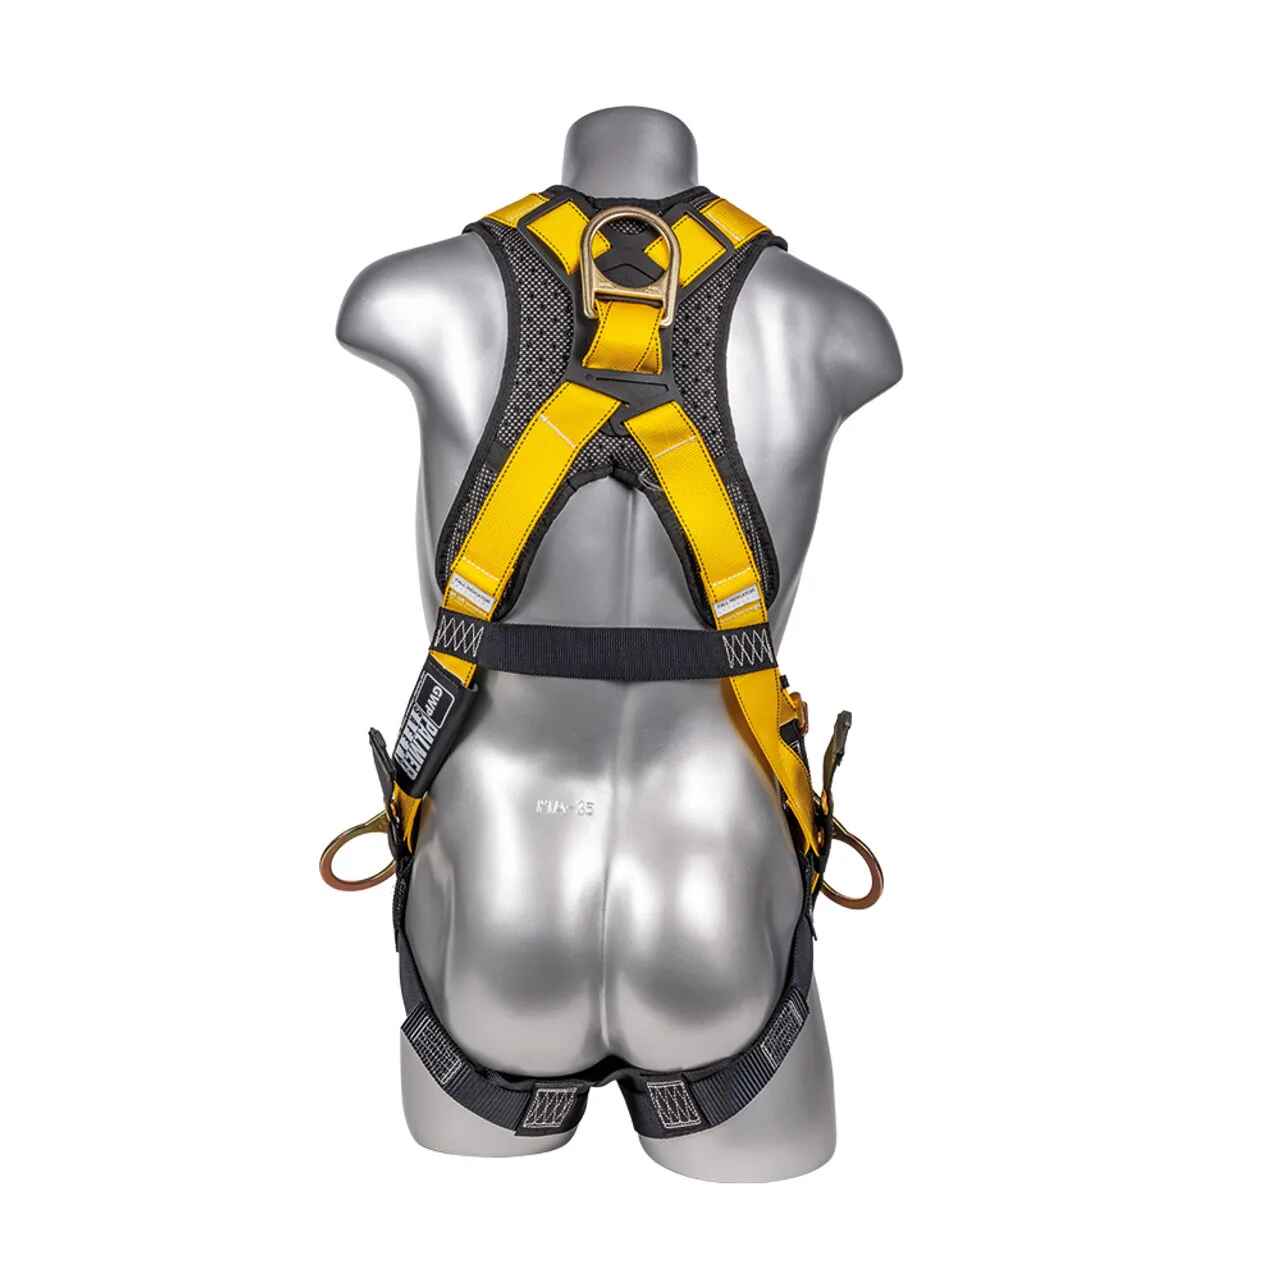 Construction Safety Harness 5 Point, Grommet Legs, Padded Back, Yellow - Defender Safety